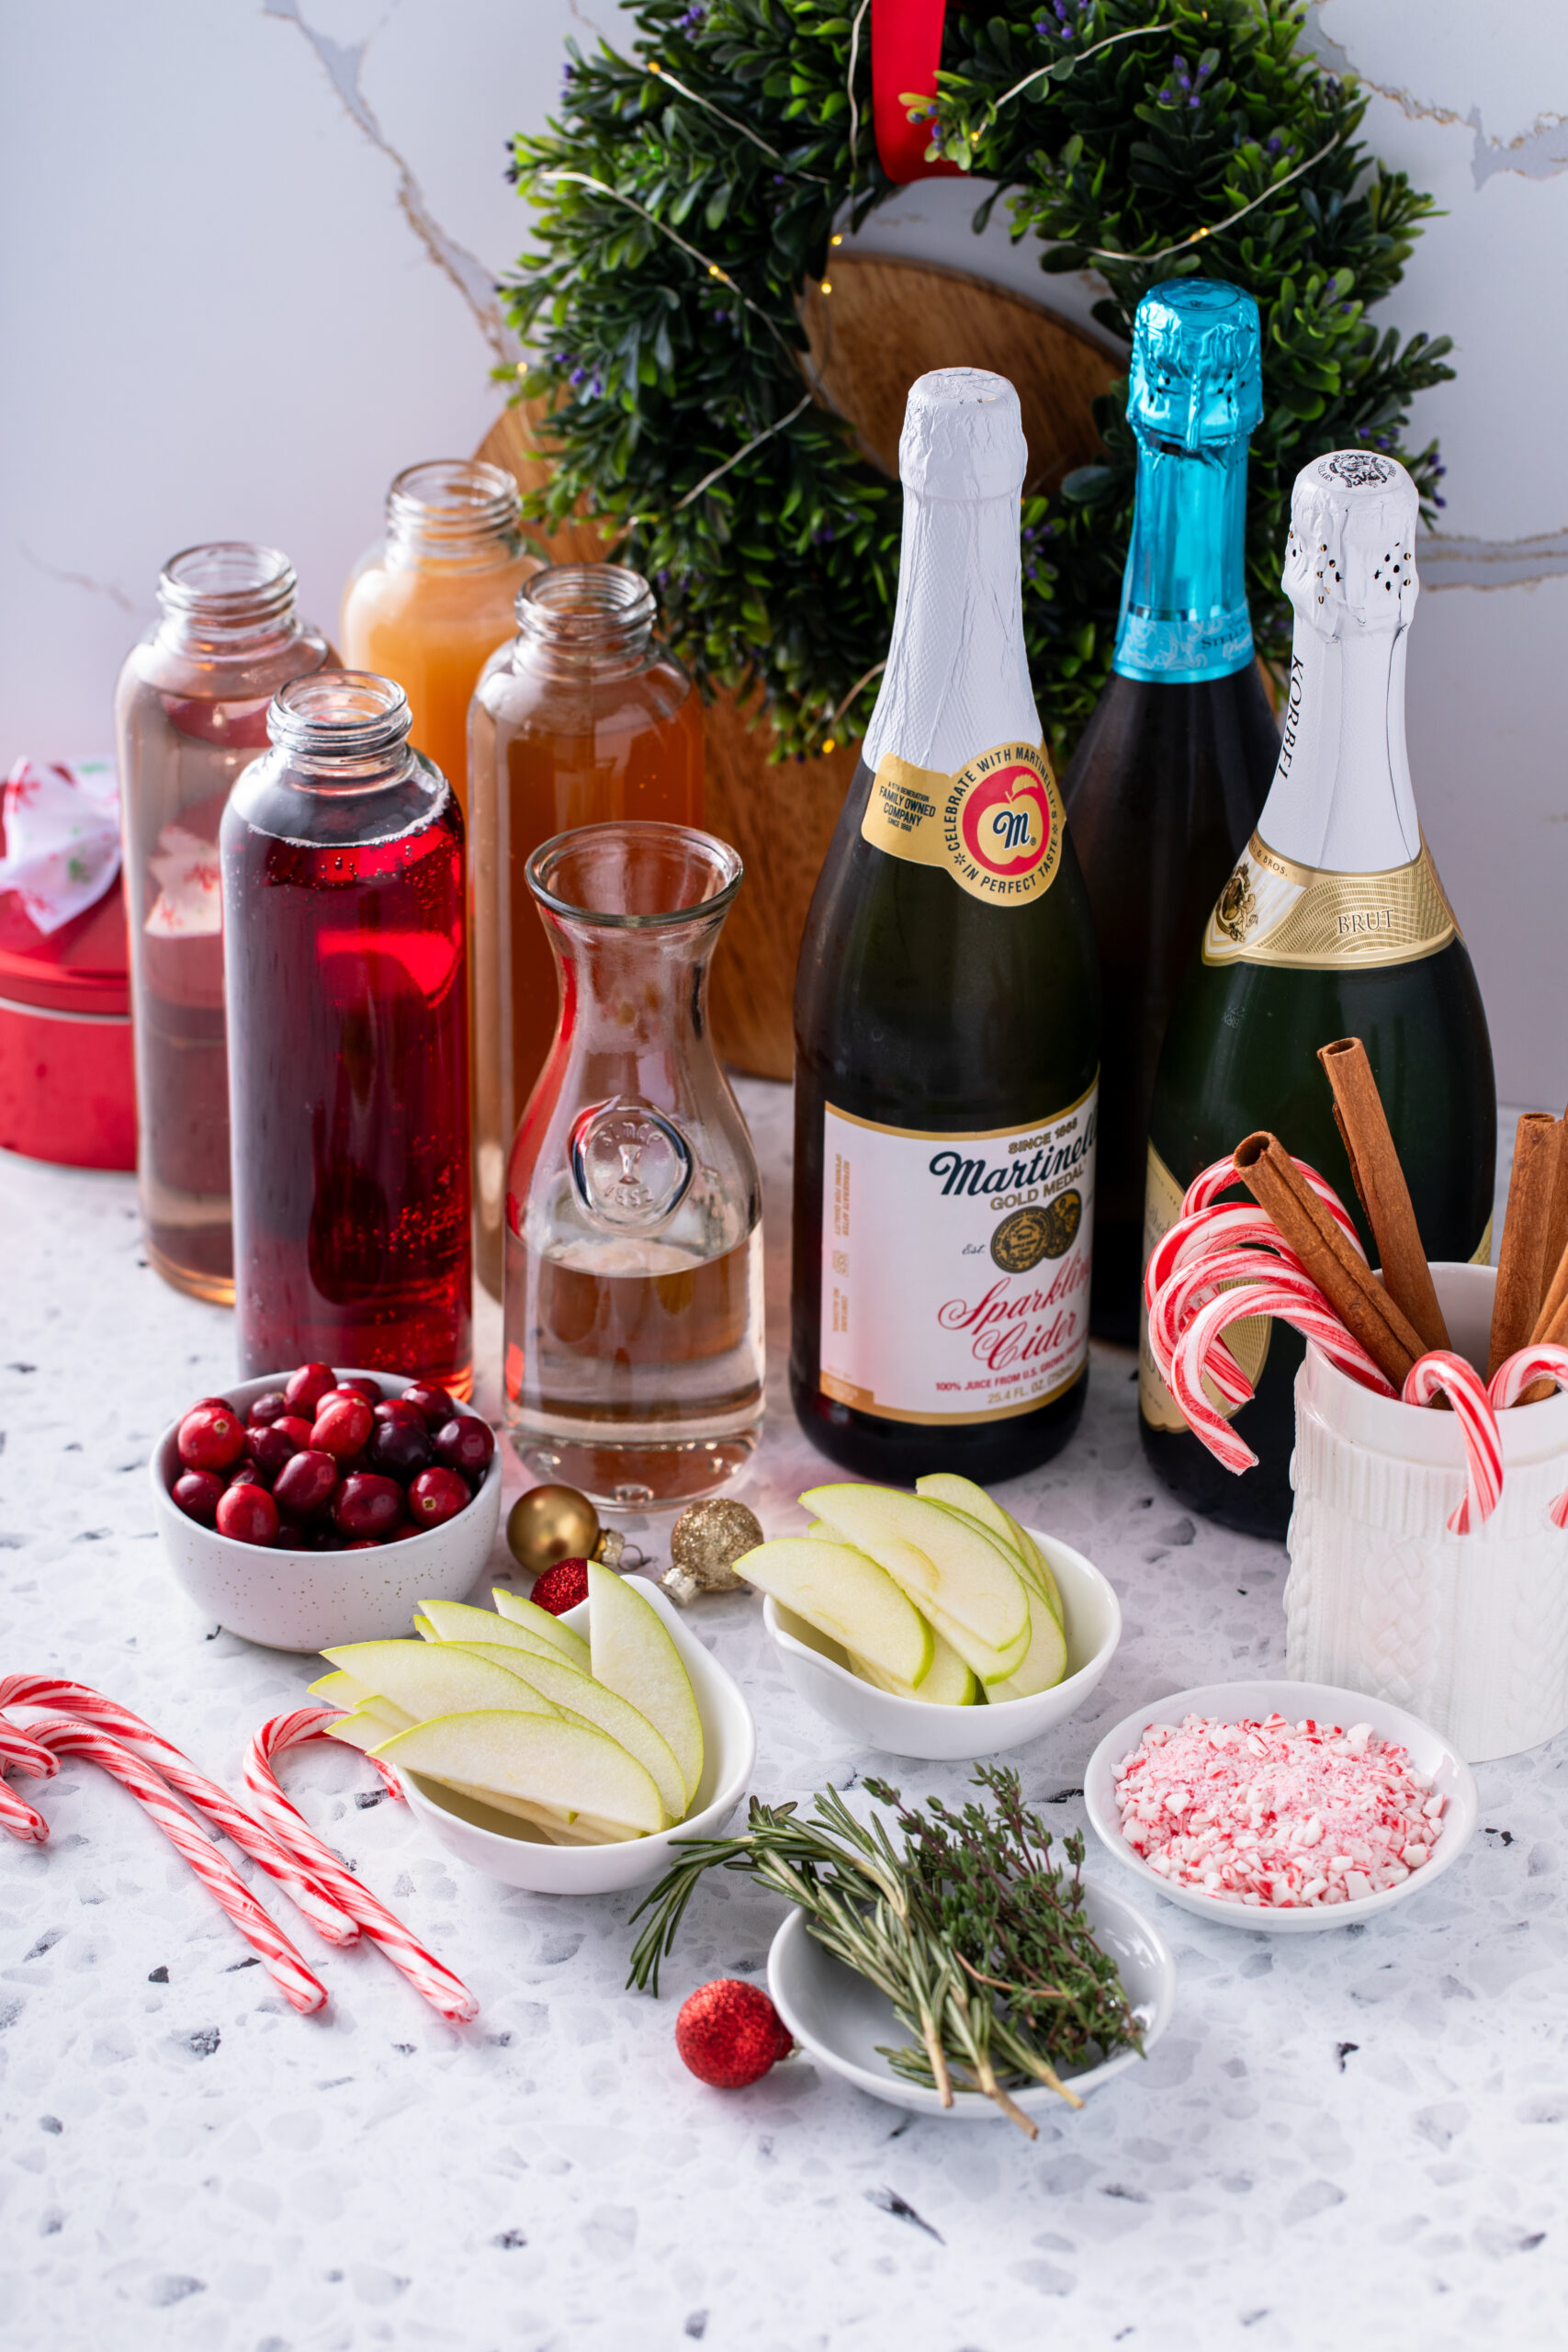 How to Setup a Holiday Mimosa Bar - Eating With Erica